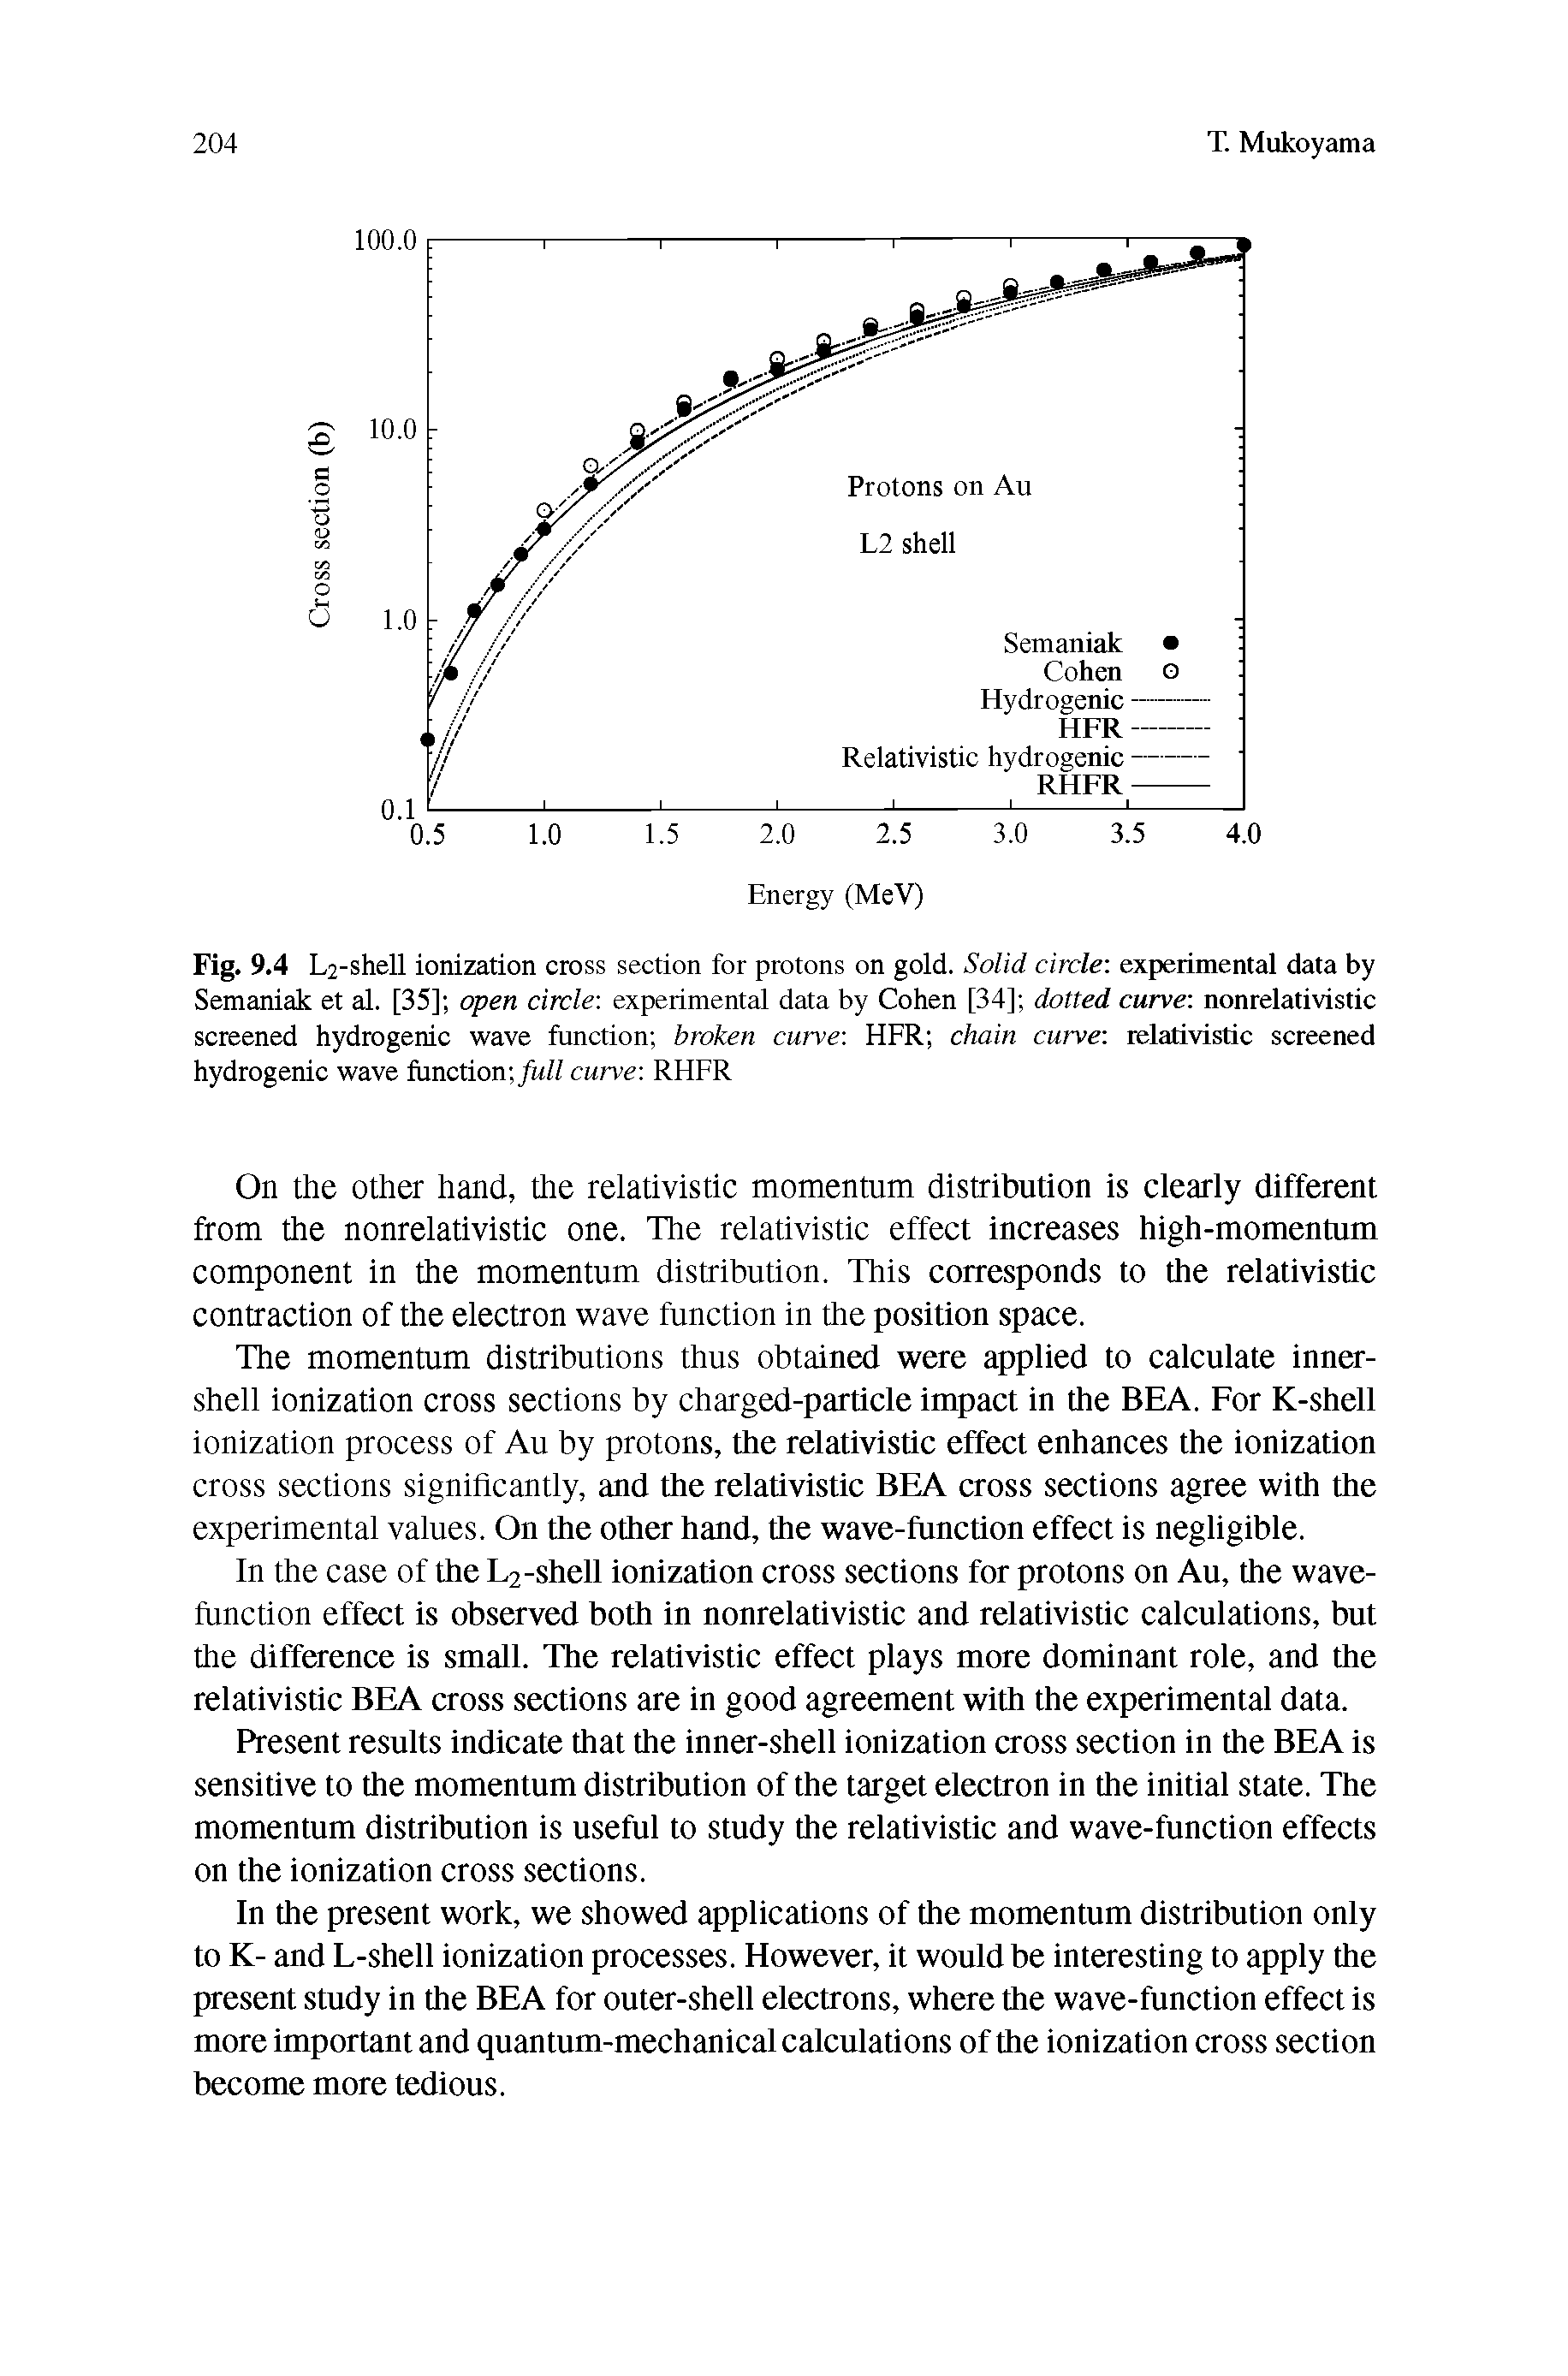 Fig. 9.4 L2-shell ionization cross section for protons on gold. Solid circle experimenttii data by Semaniak et al. [35] open circle experimental data by Cohen [34] dotted curve nonrelativistic screened hydrogenic wave function broken curve HFR chain curve relativistic screened hydrogenic wave function / // curve RHFR...